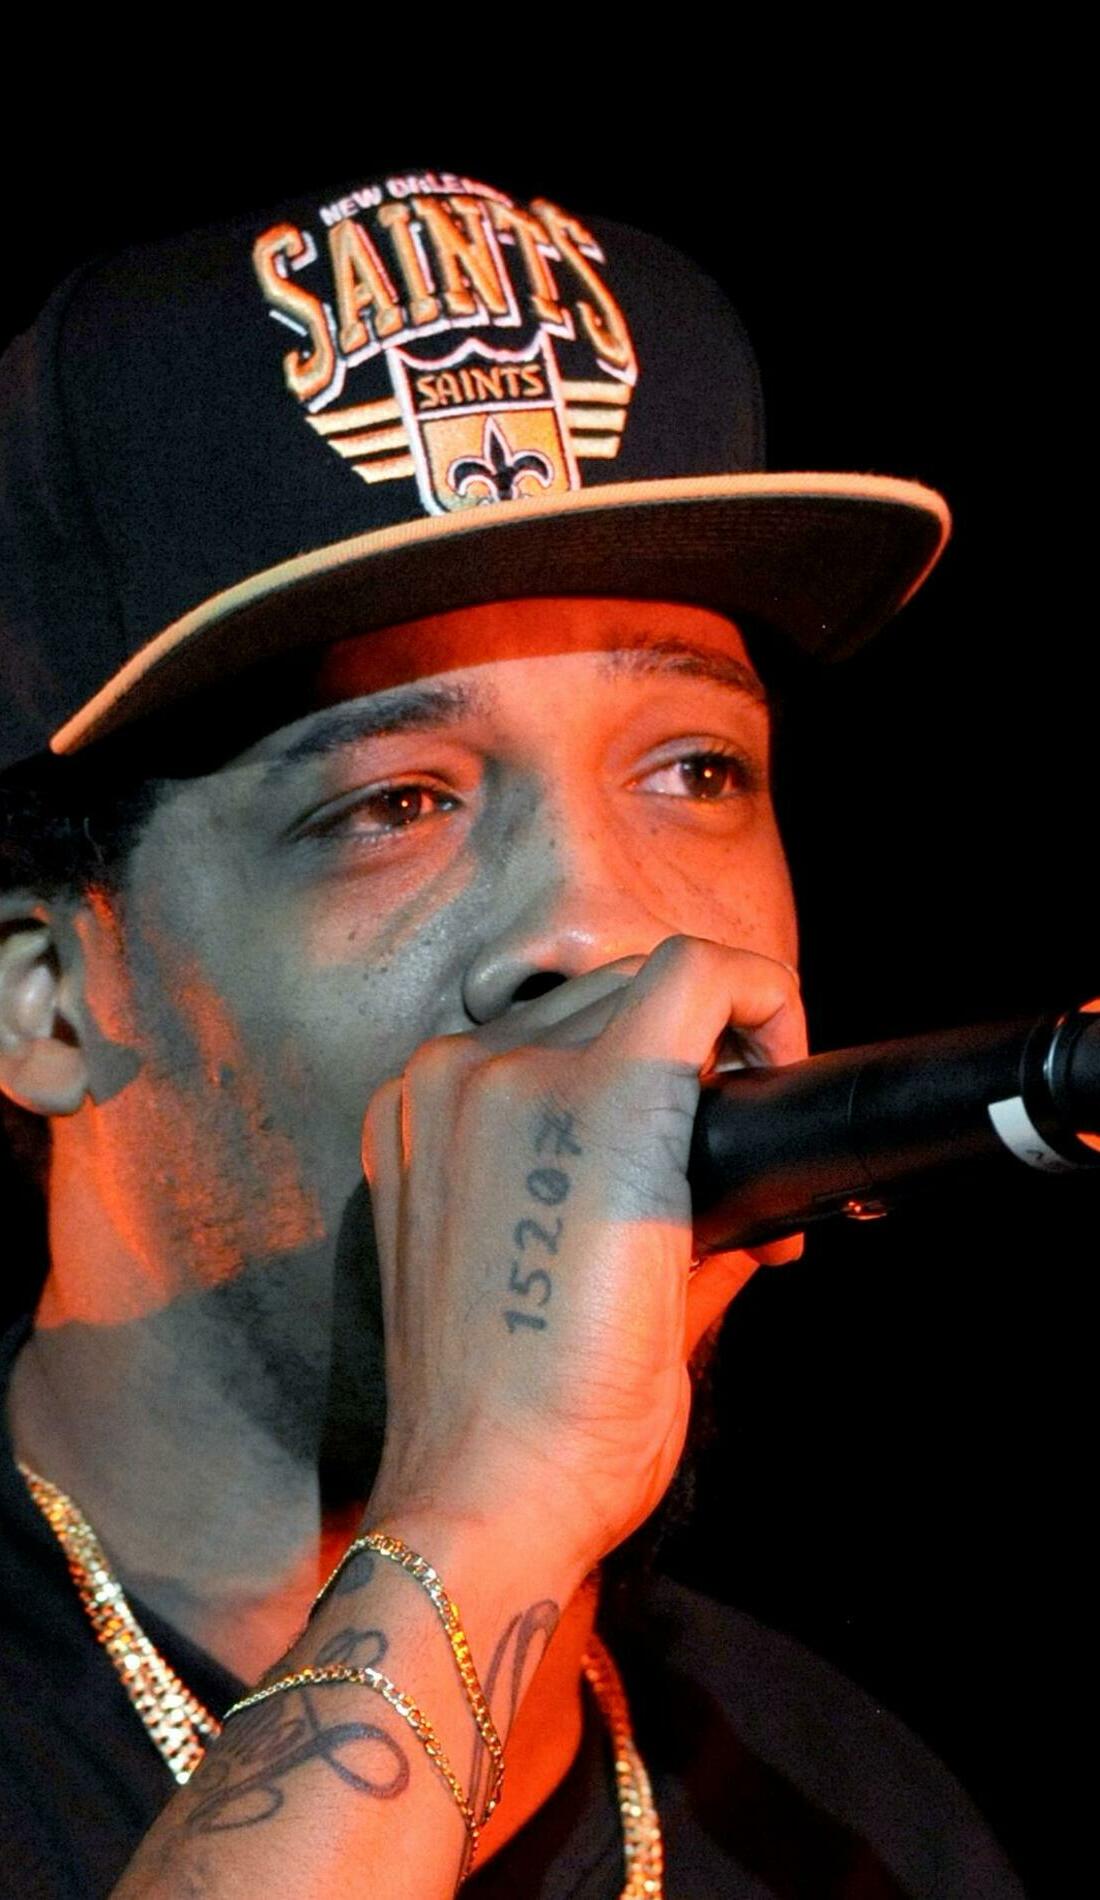 A Chevy Woods live event